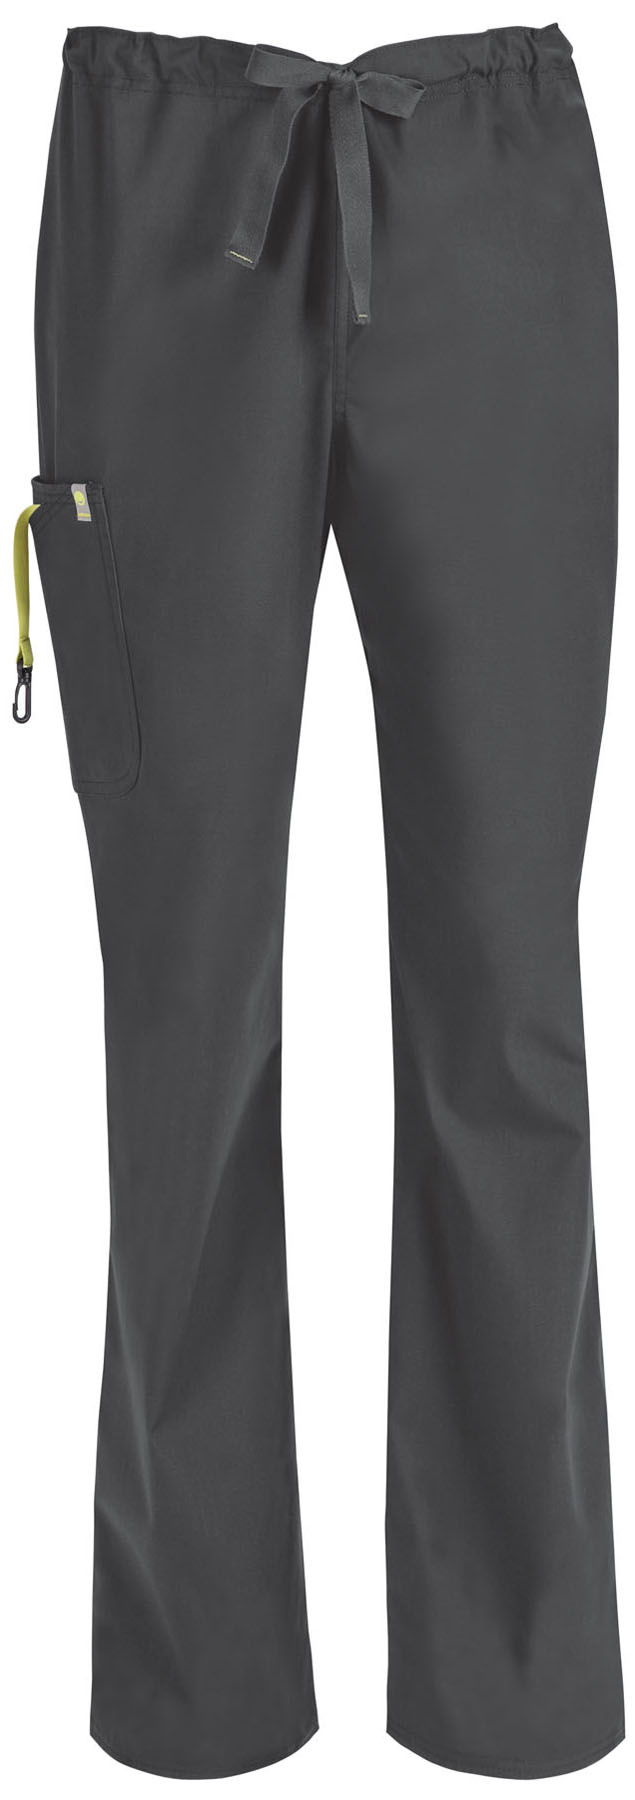 Code Happy Medical Mens Bliss w/ Certainty Mens Drawstring Cargo Pant-Code Happy